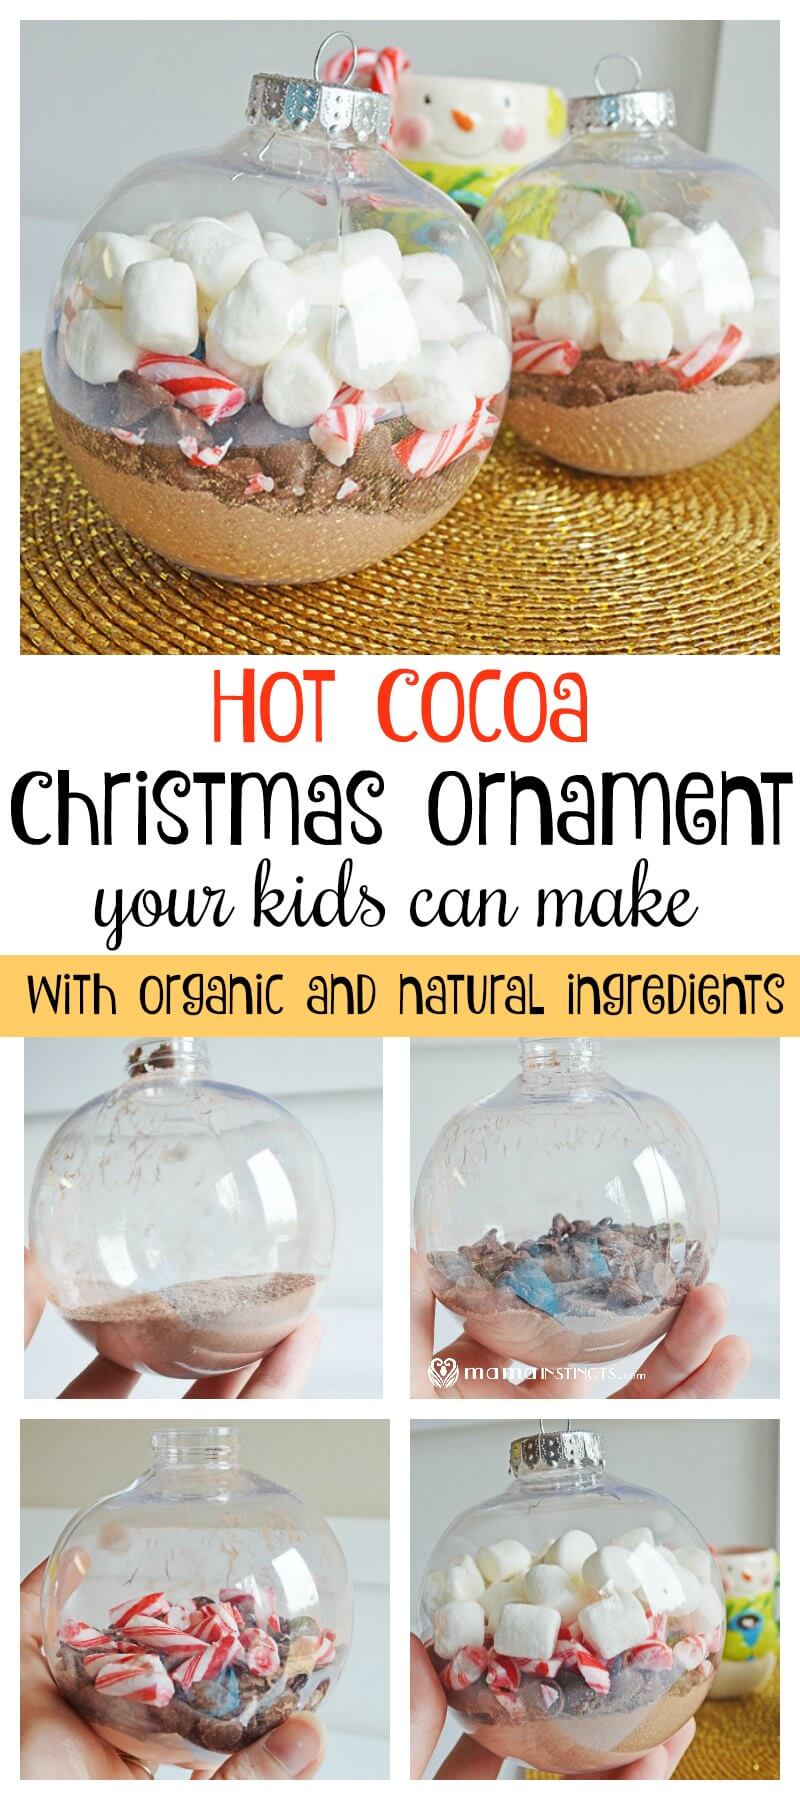 Make this simple yet adorable homemade Hot Cocoa Christmas Ornament with your kids. It helps develop their fine motor skills and encourages giving to others. #Christmas #ChristmasCraft #ChristmasOrnament